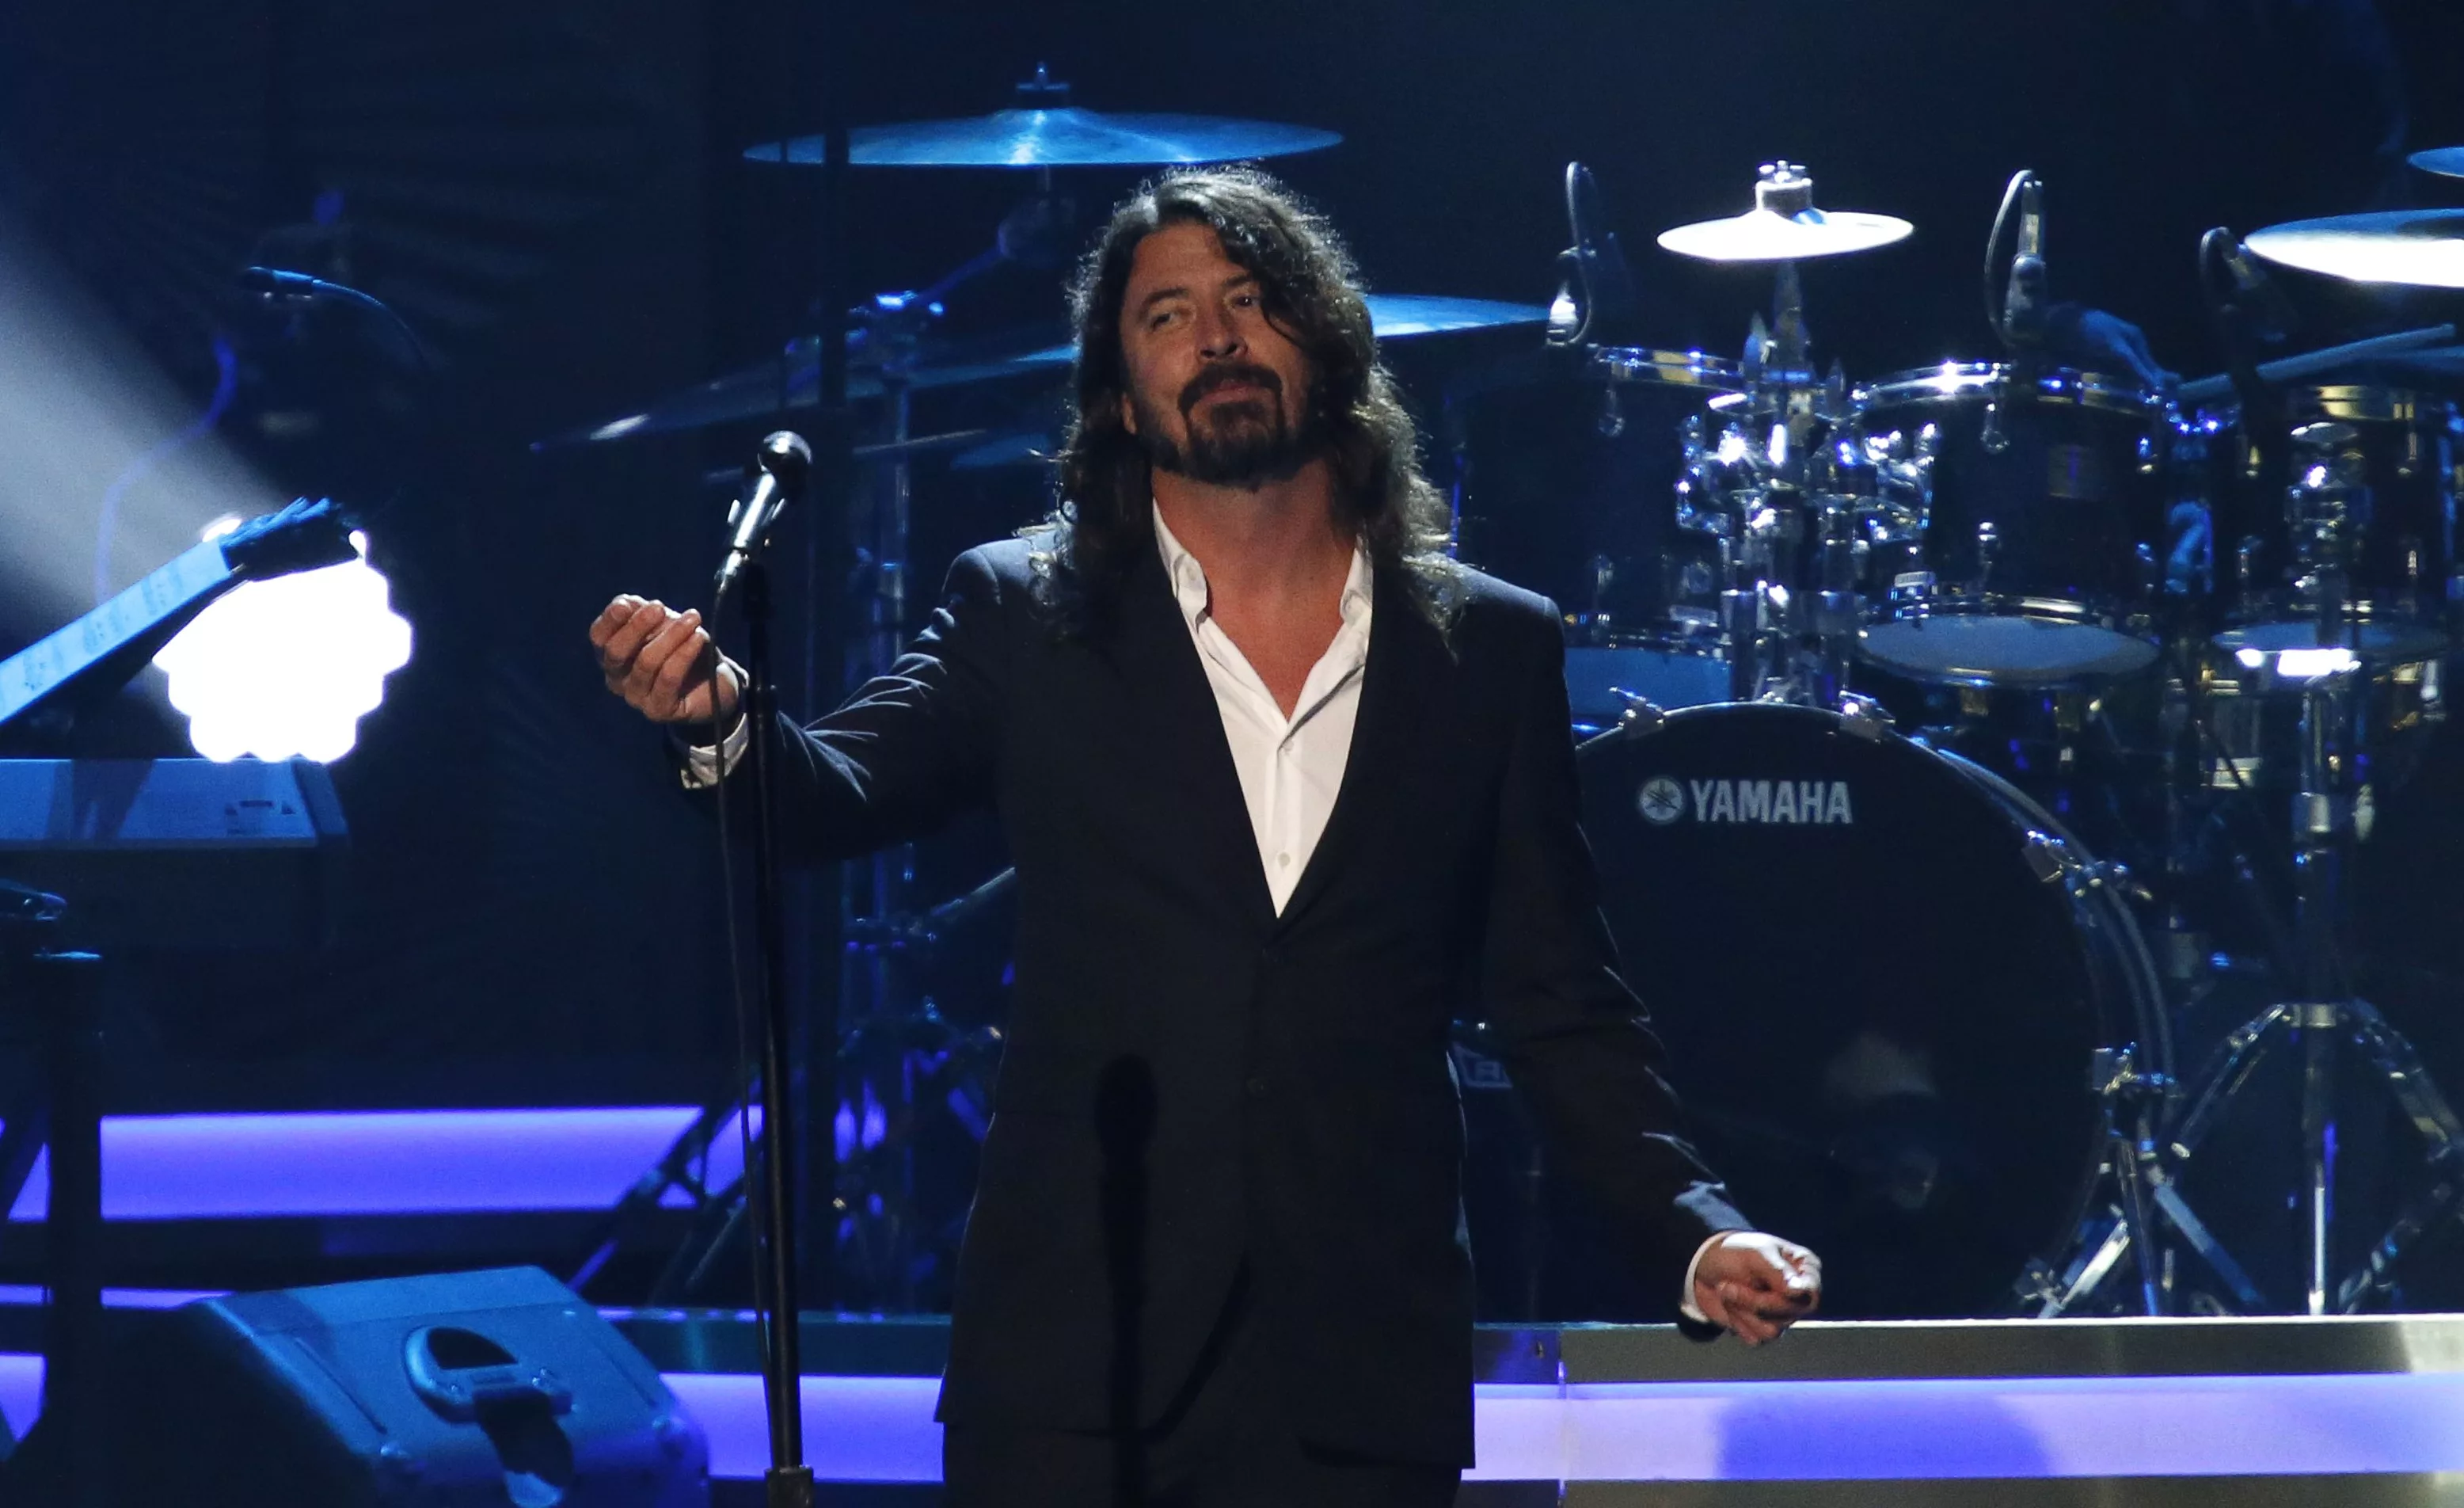 dave-grohl-2016-02-14t120000z_1879952360_tb3ec2e0knhpt_rtrmadp_3_music-lionelrichie